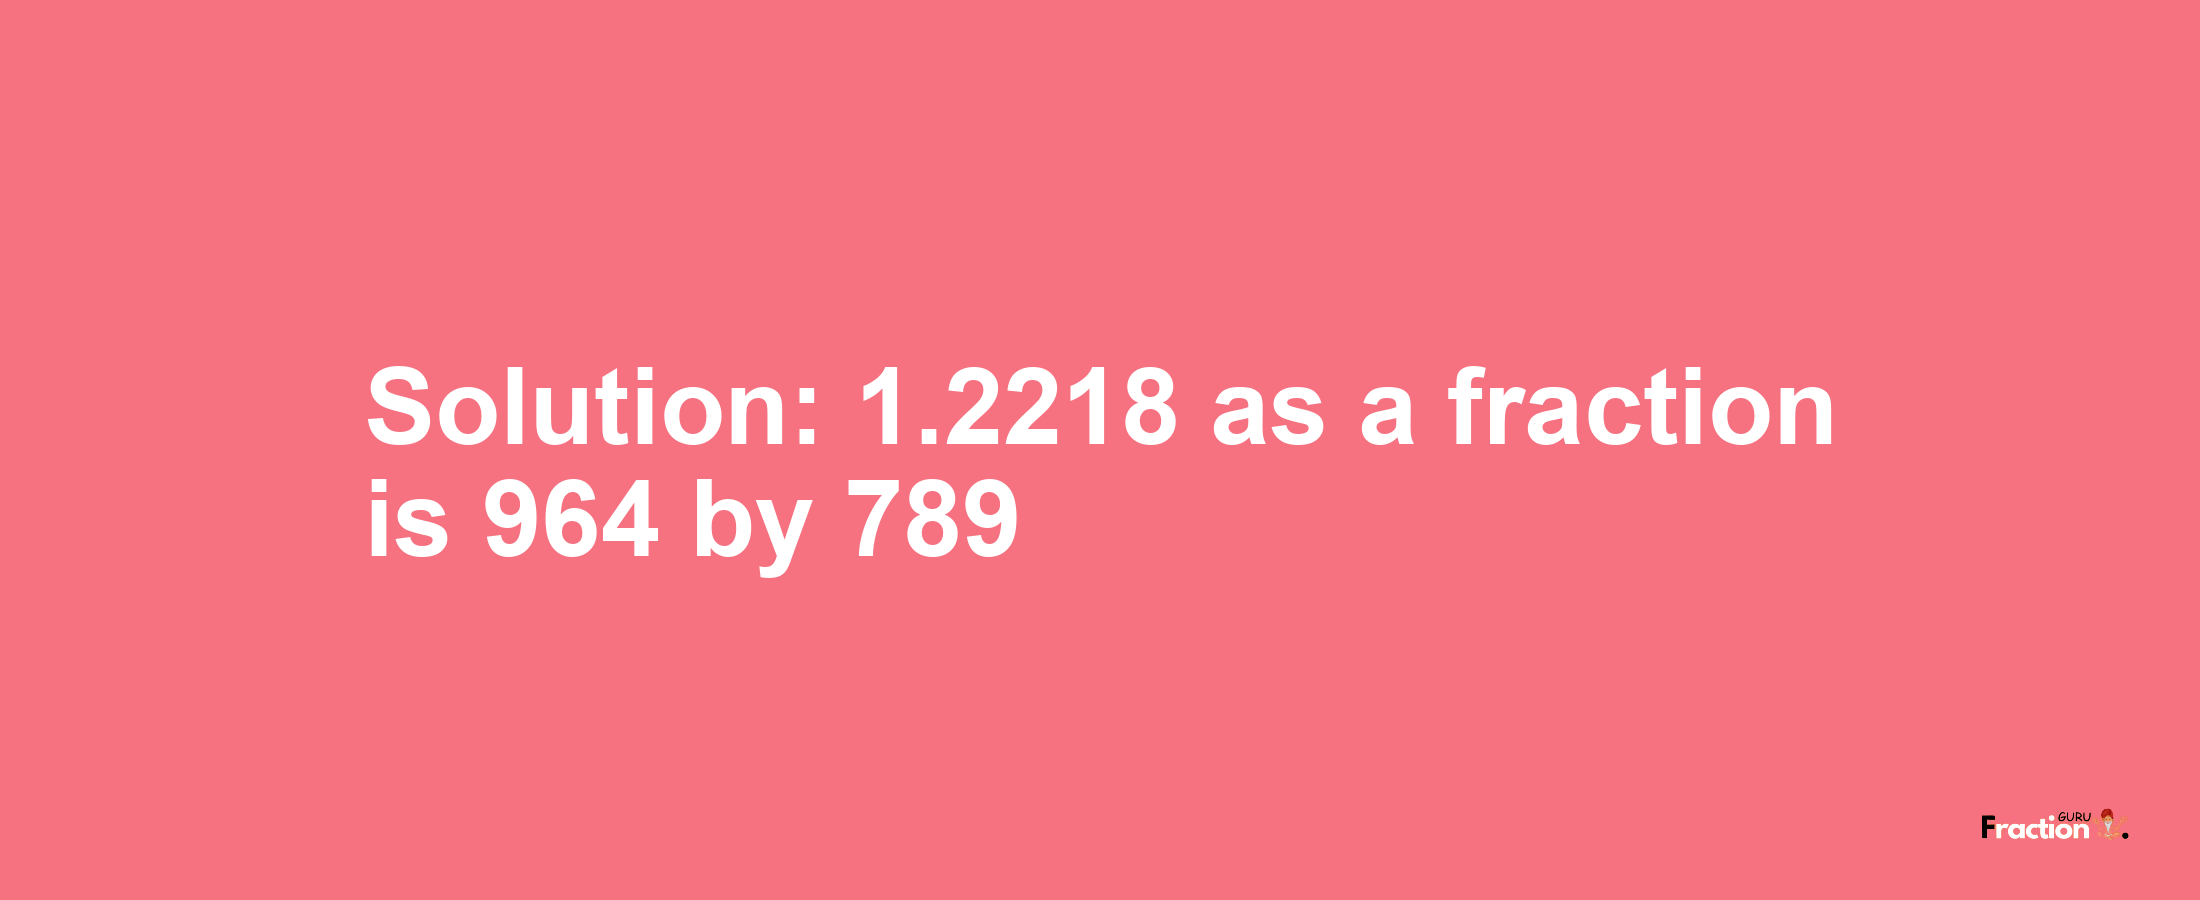 Solution:1.2218 as a fraction is 964/789